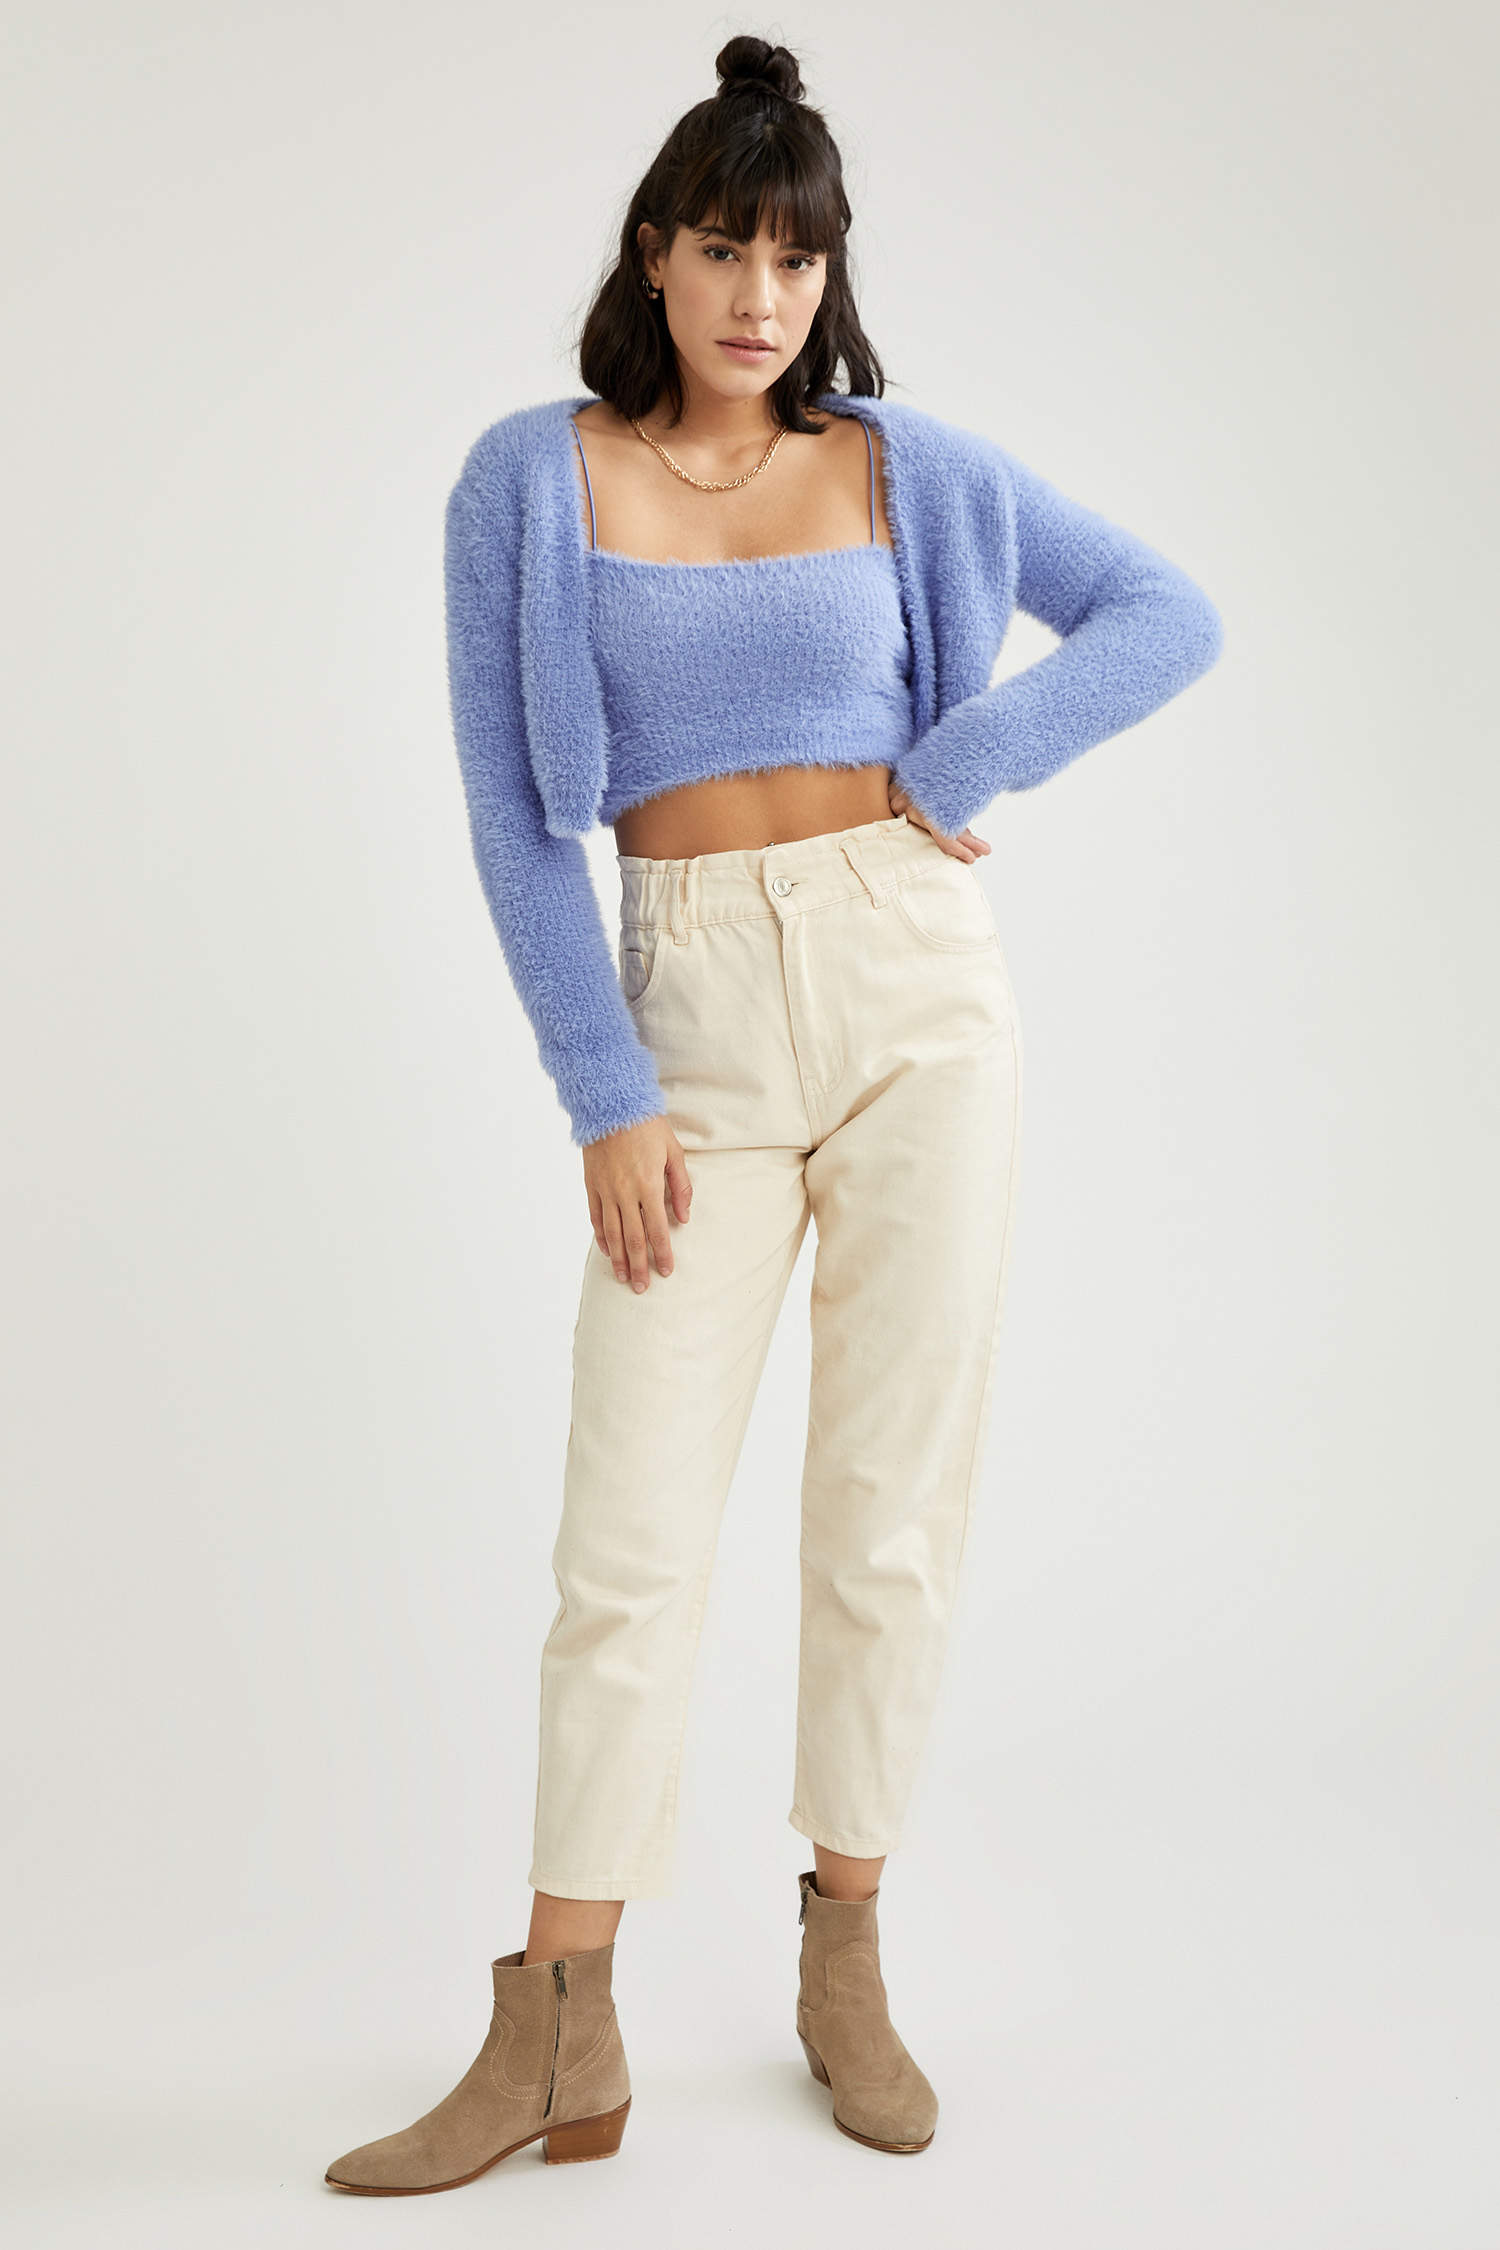 Blue Woman Long-Sleeved Cropped Fit V-Neck Outfit 1913530 | DeFacto